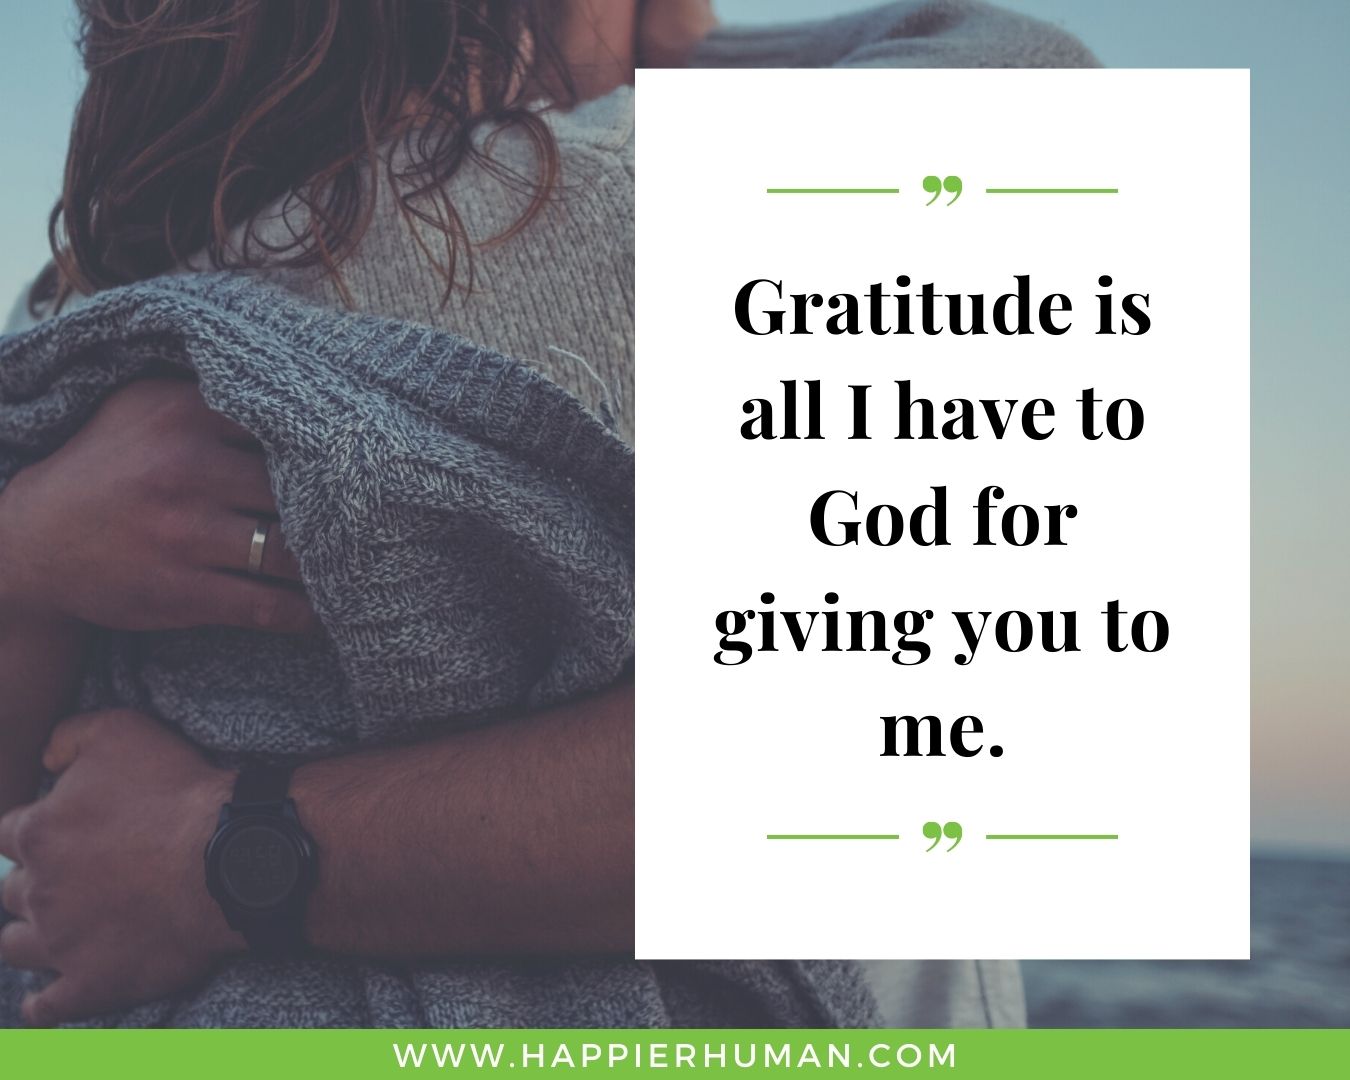 Gratitude quotes of love for  women “Gratitude is all I have to God for giving you to me.”